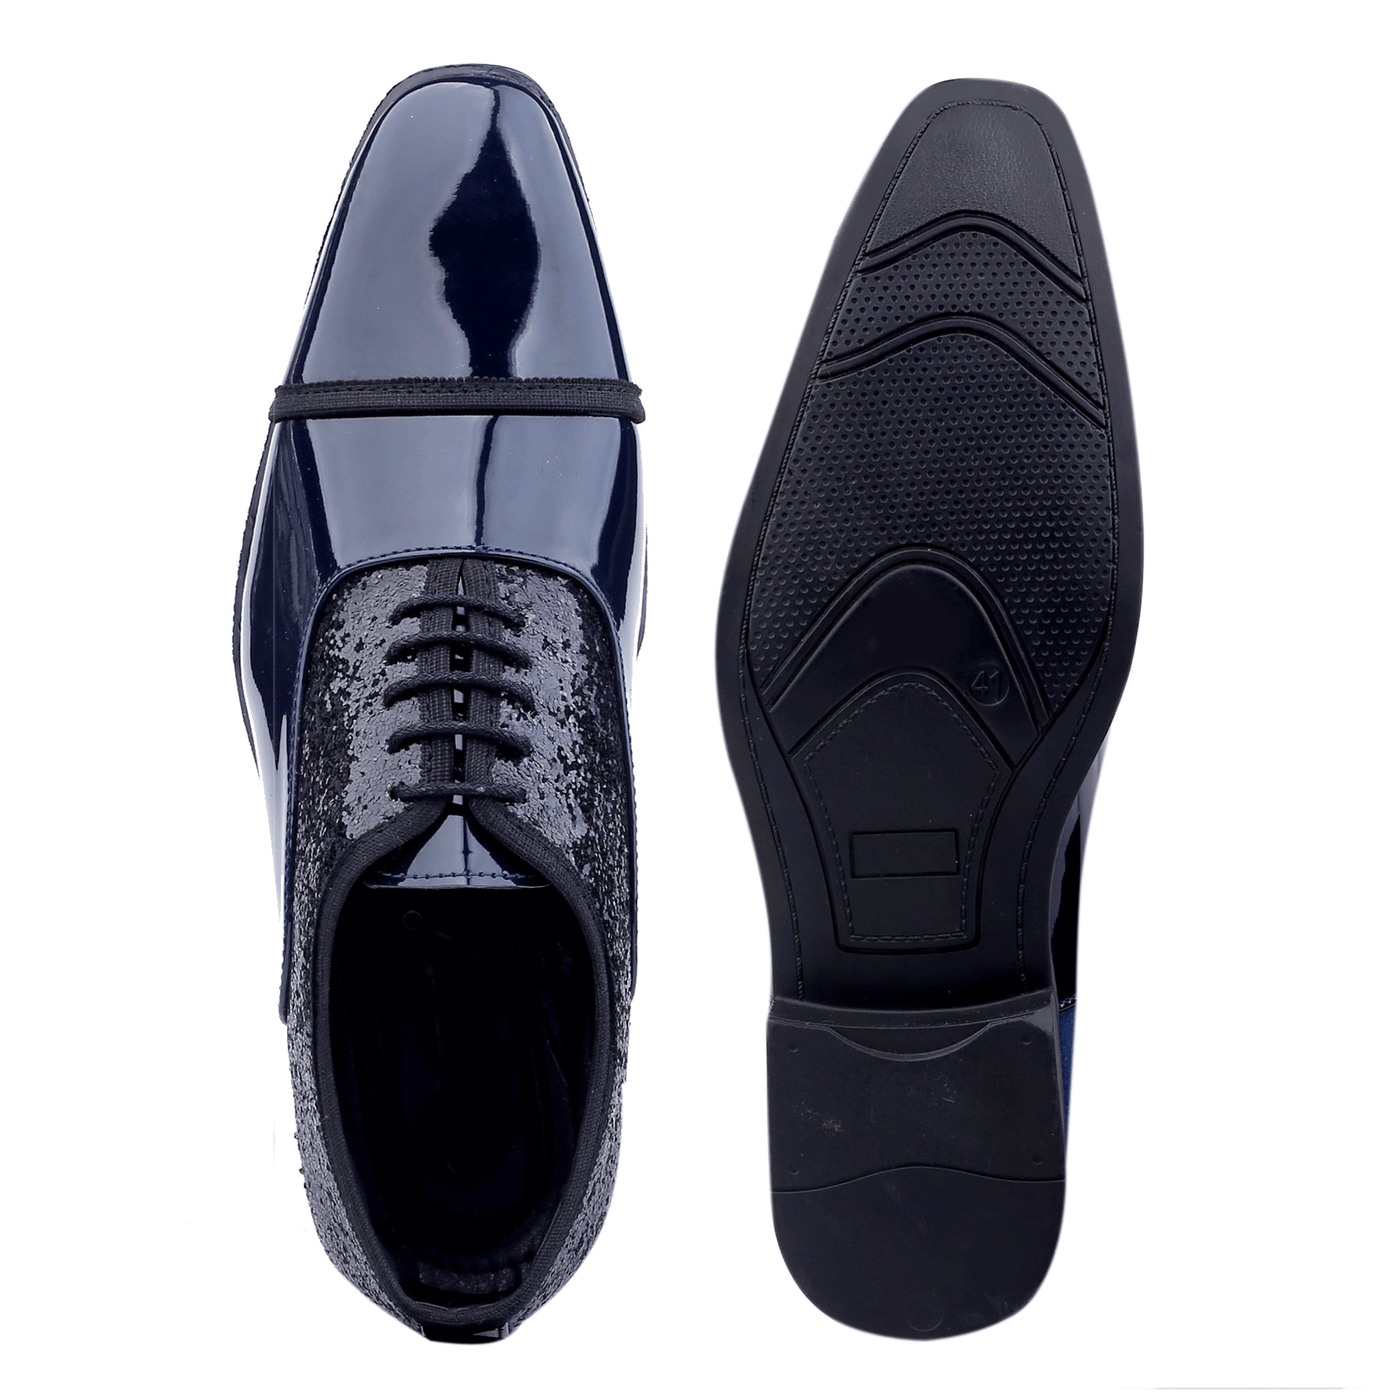 Stylish Party Wear Premium Quality Lace-Up Formal Shoes For All Season-Unique and Classy